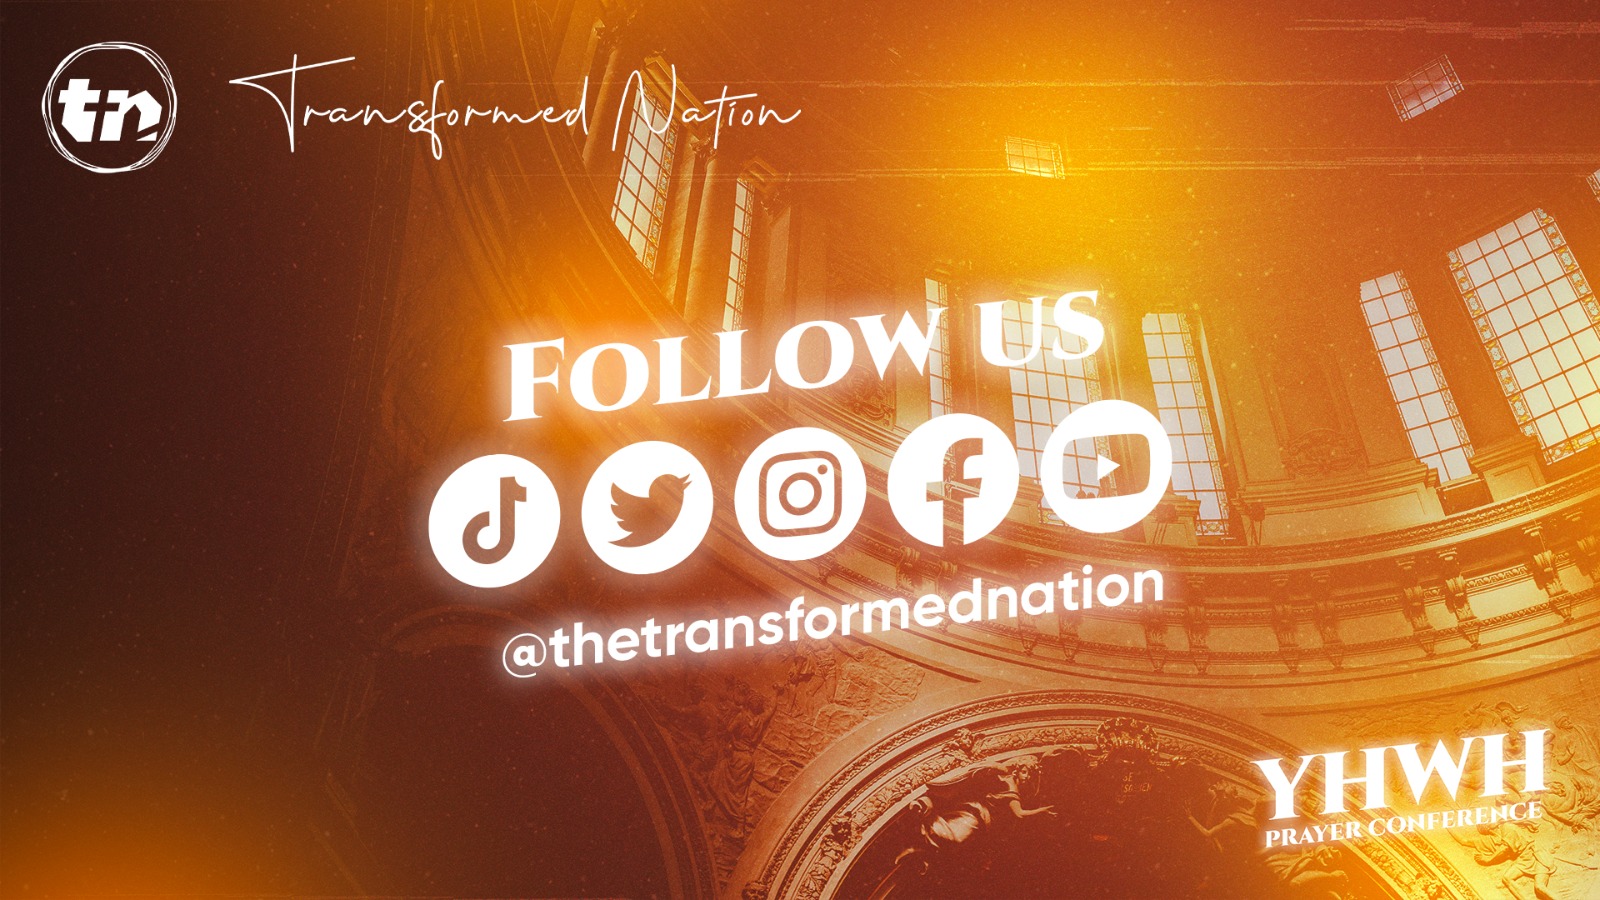 FOLLOW THE TRANSFORMED NATION